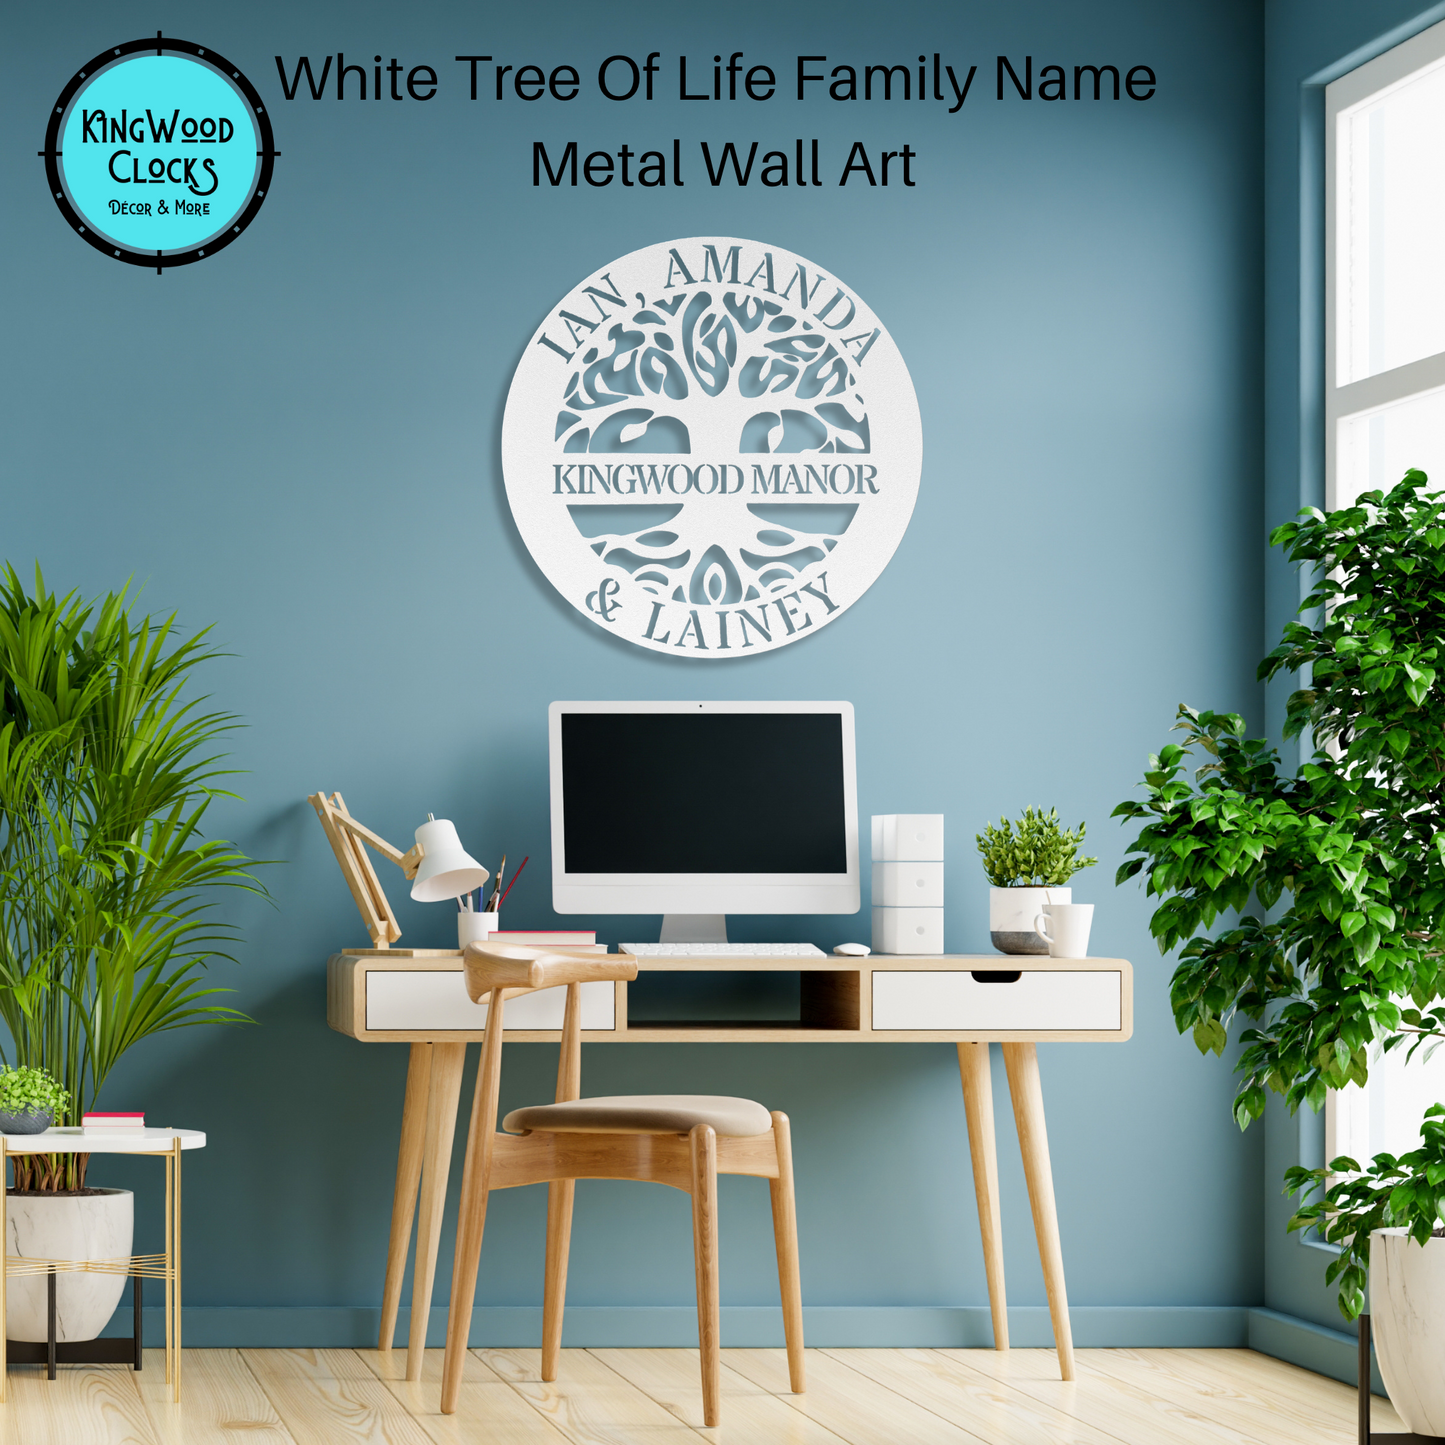 Tree Of Life Family Name Personalized Metal Wall Art white